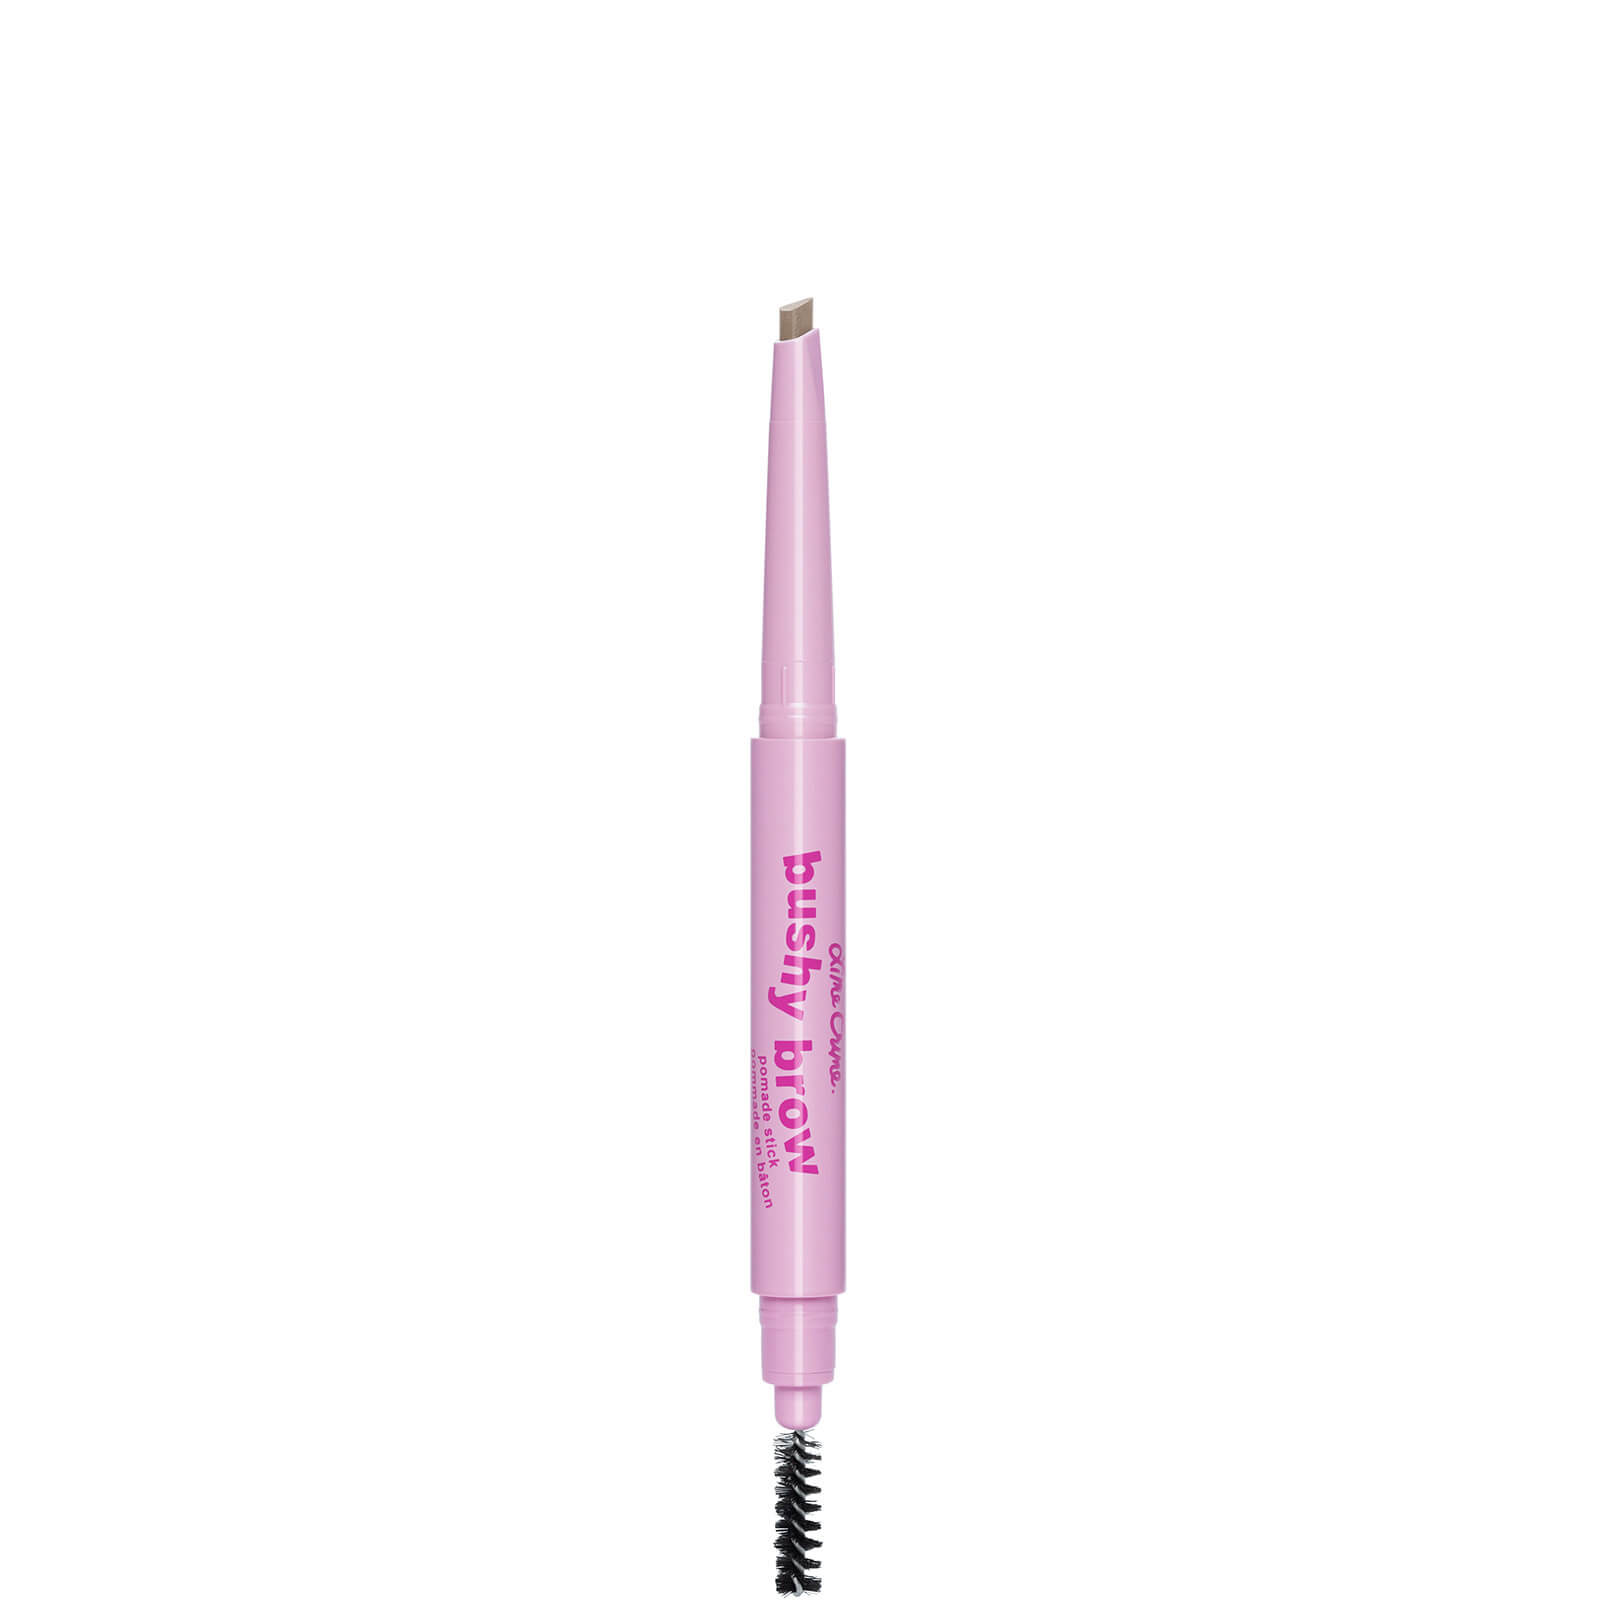 Lime Crime Bushy Brow Pomade Stick 11g (Various Shades) - Dirty Blonde